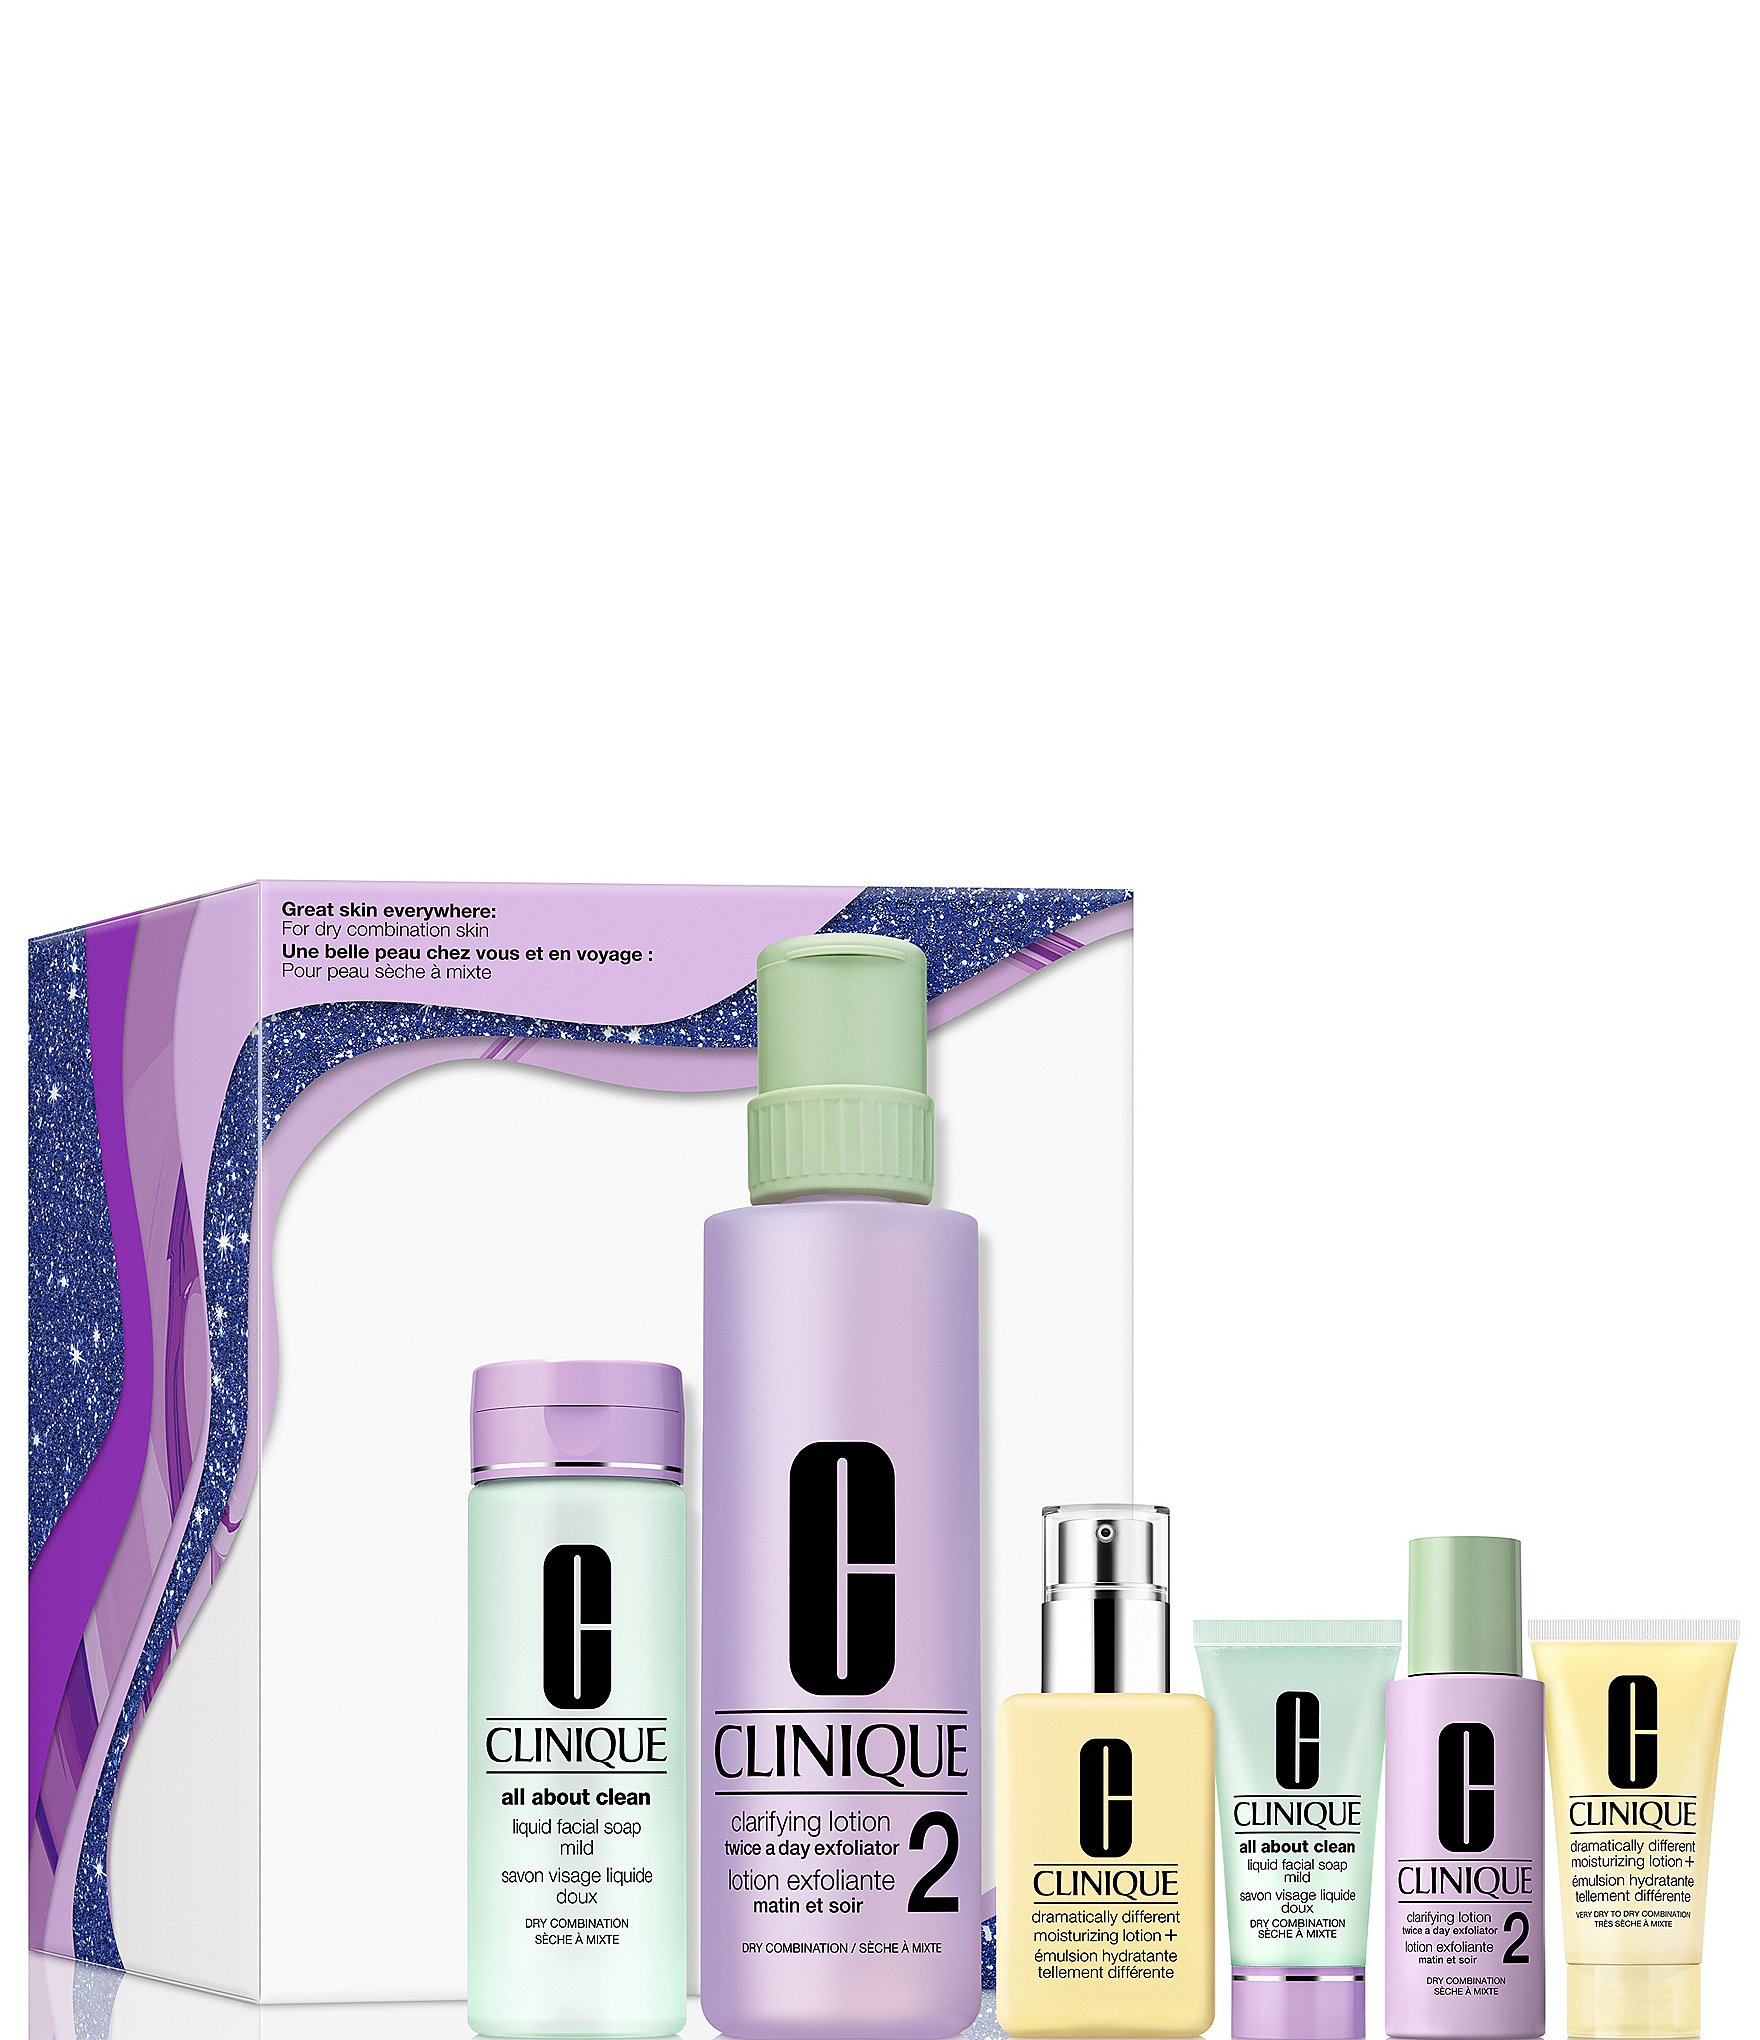 Clinique Great Skin Skincare Set: For Dry Combination Skin | Dillard's